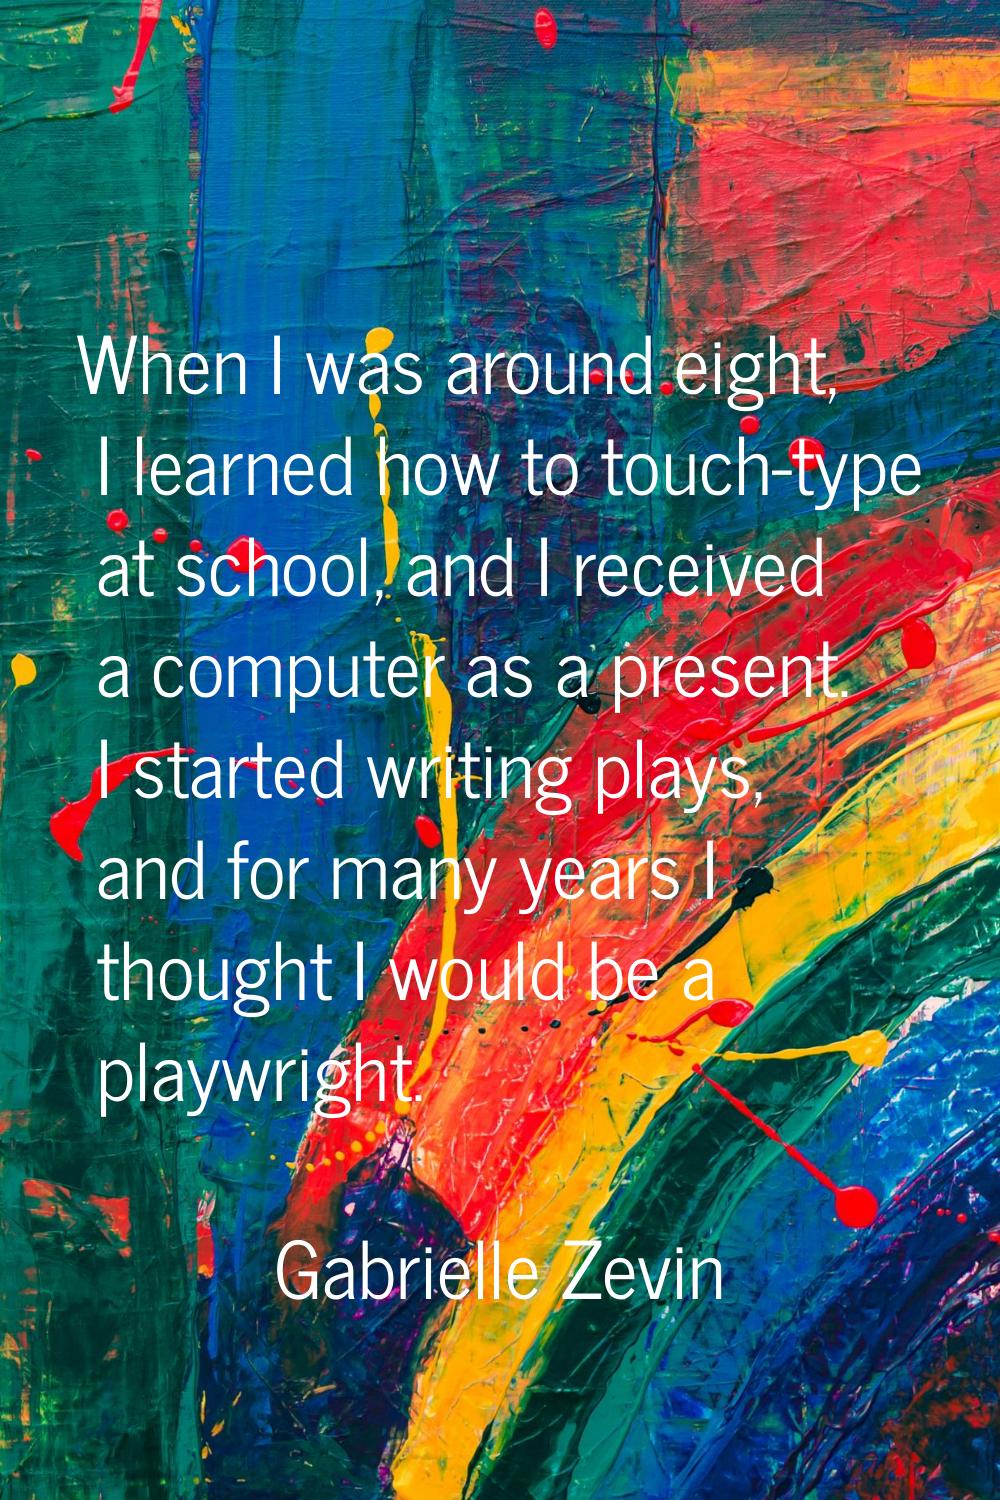 When I was around eight, I learned how to touch-type at school, and I received a computer as a pres